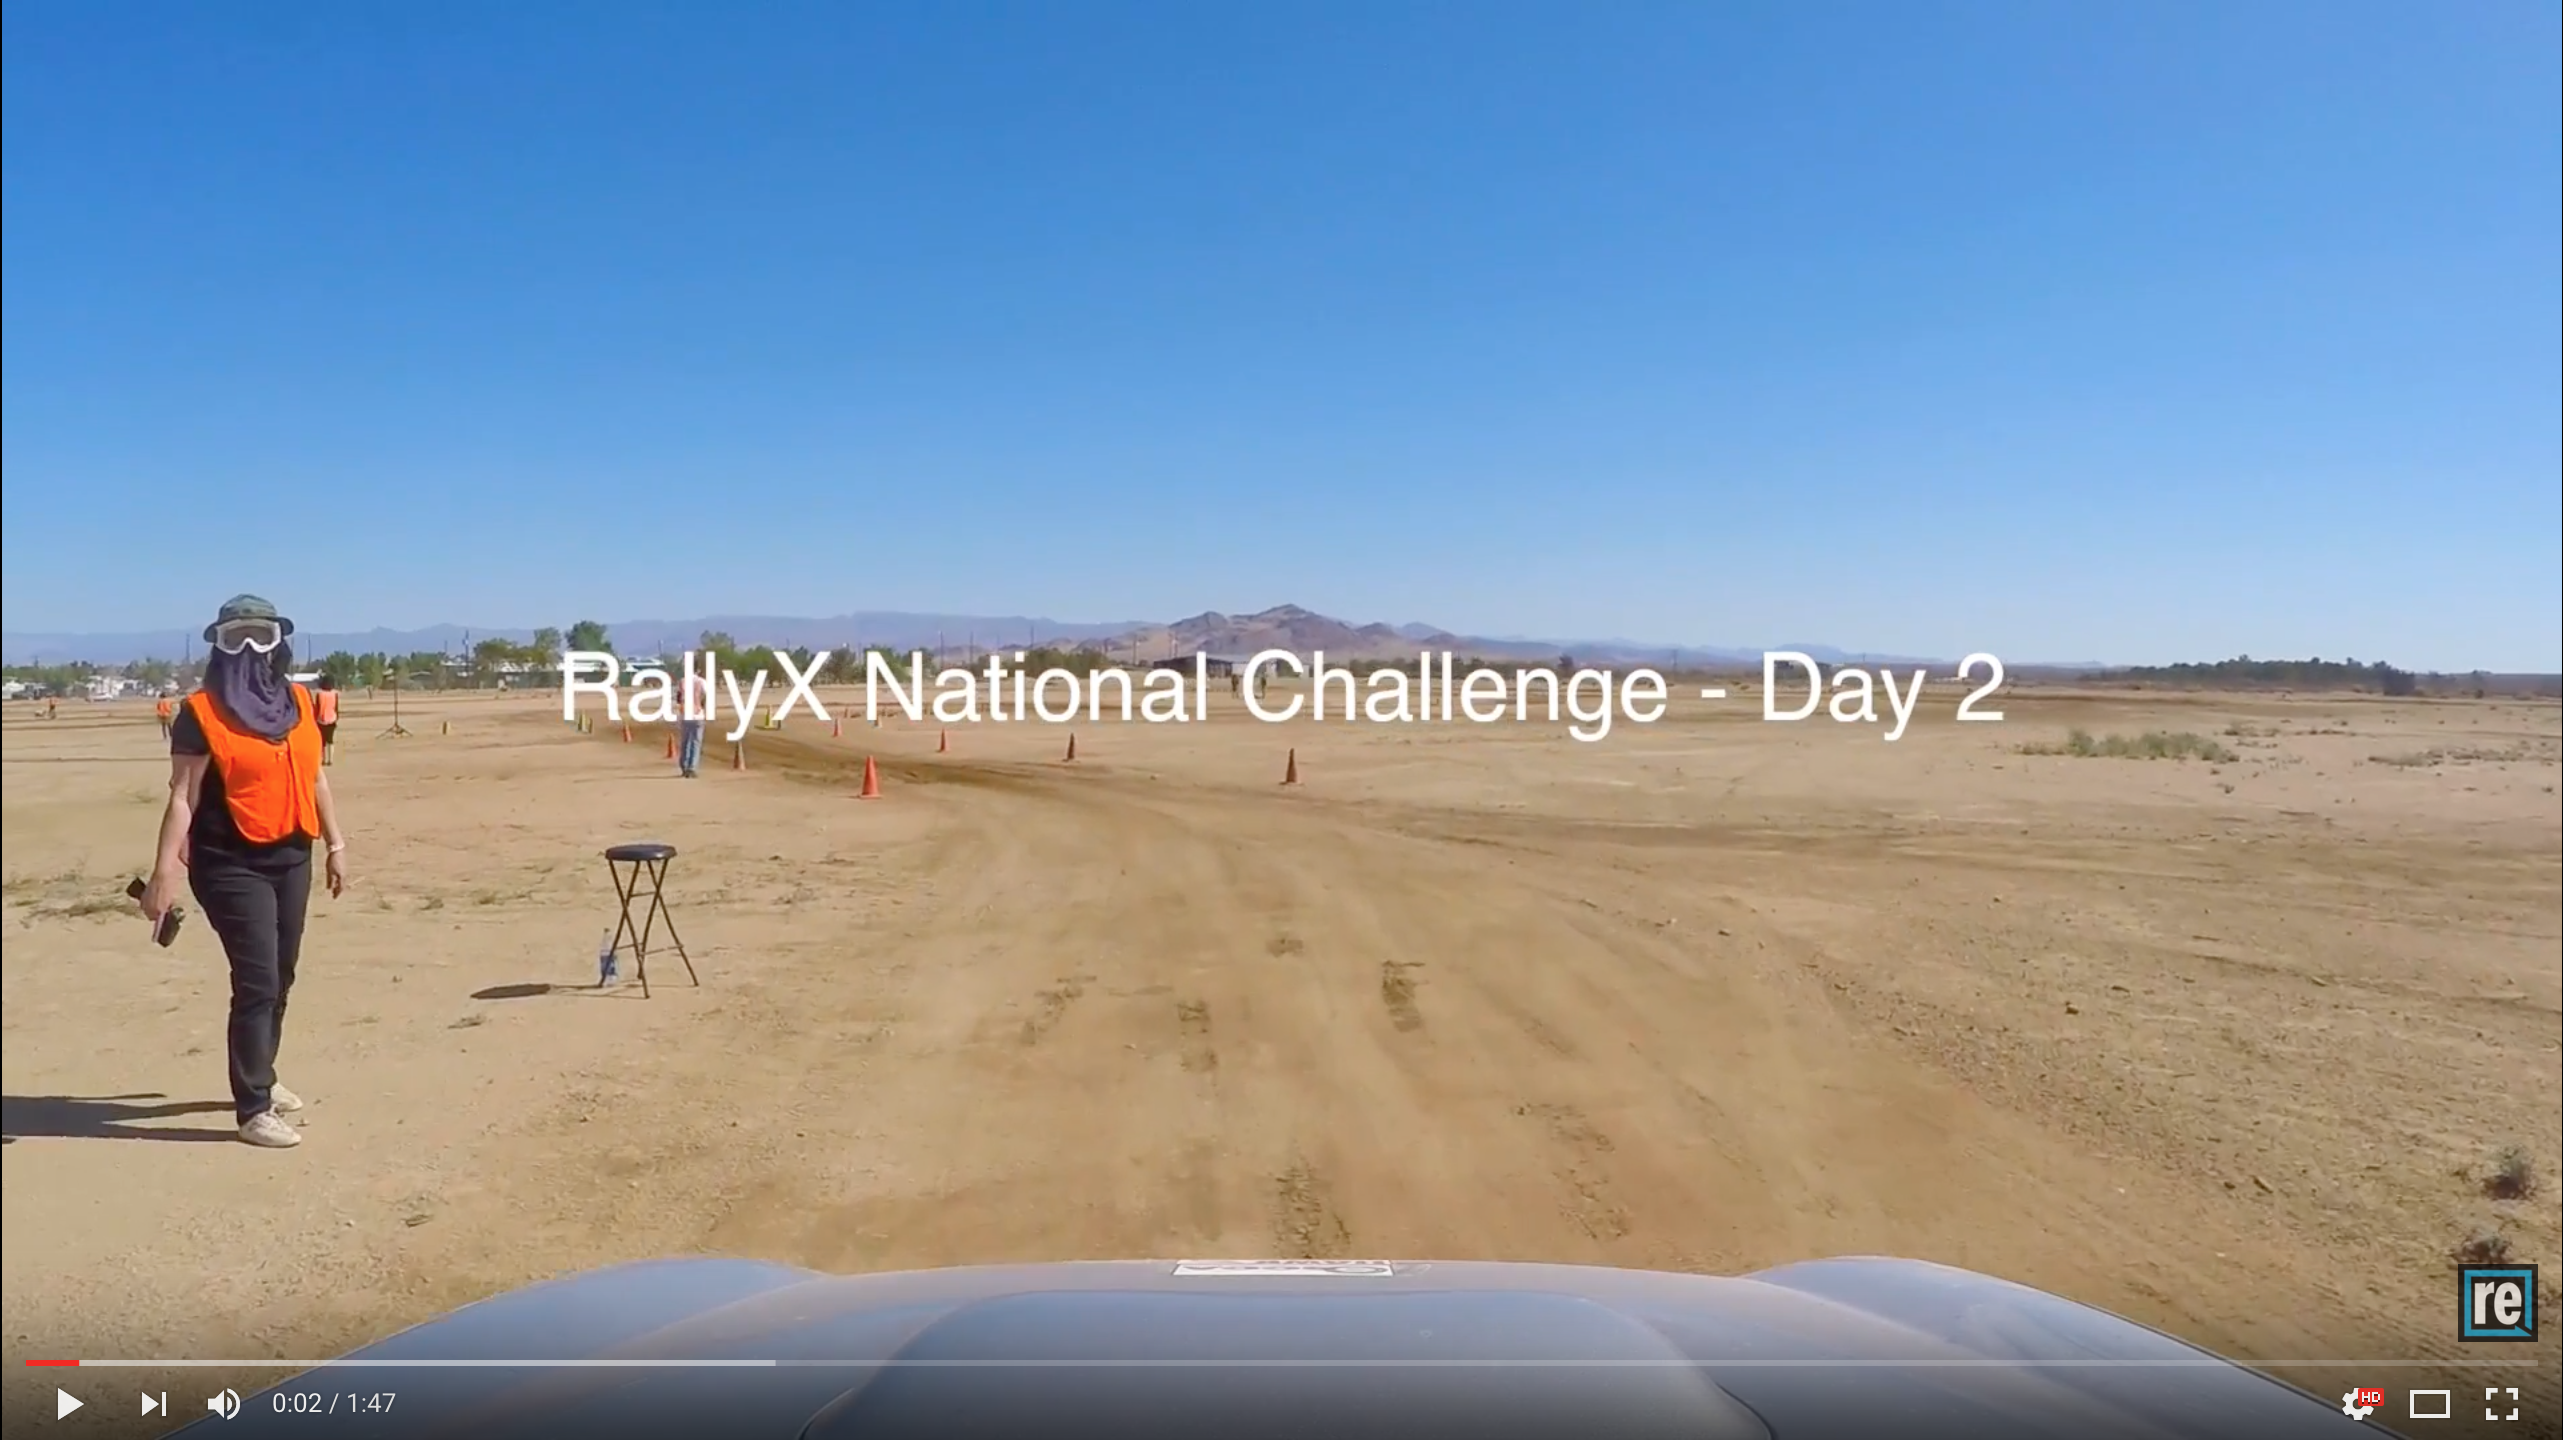 Event Video: RallyX National Challenge Day 2